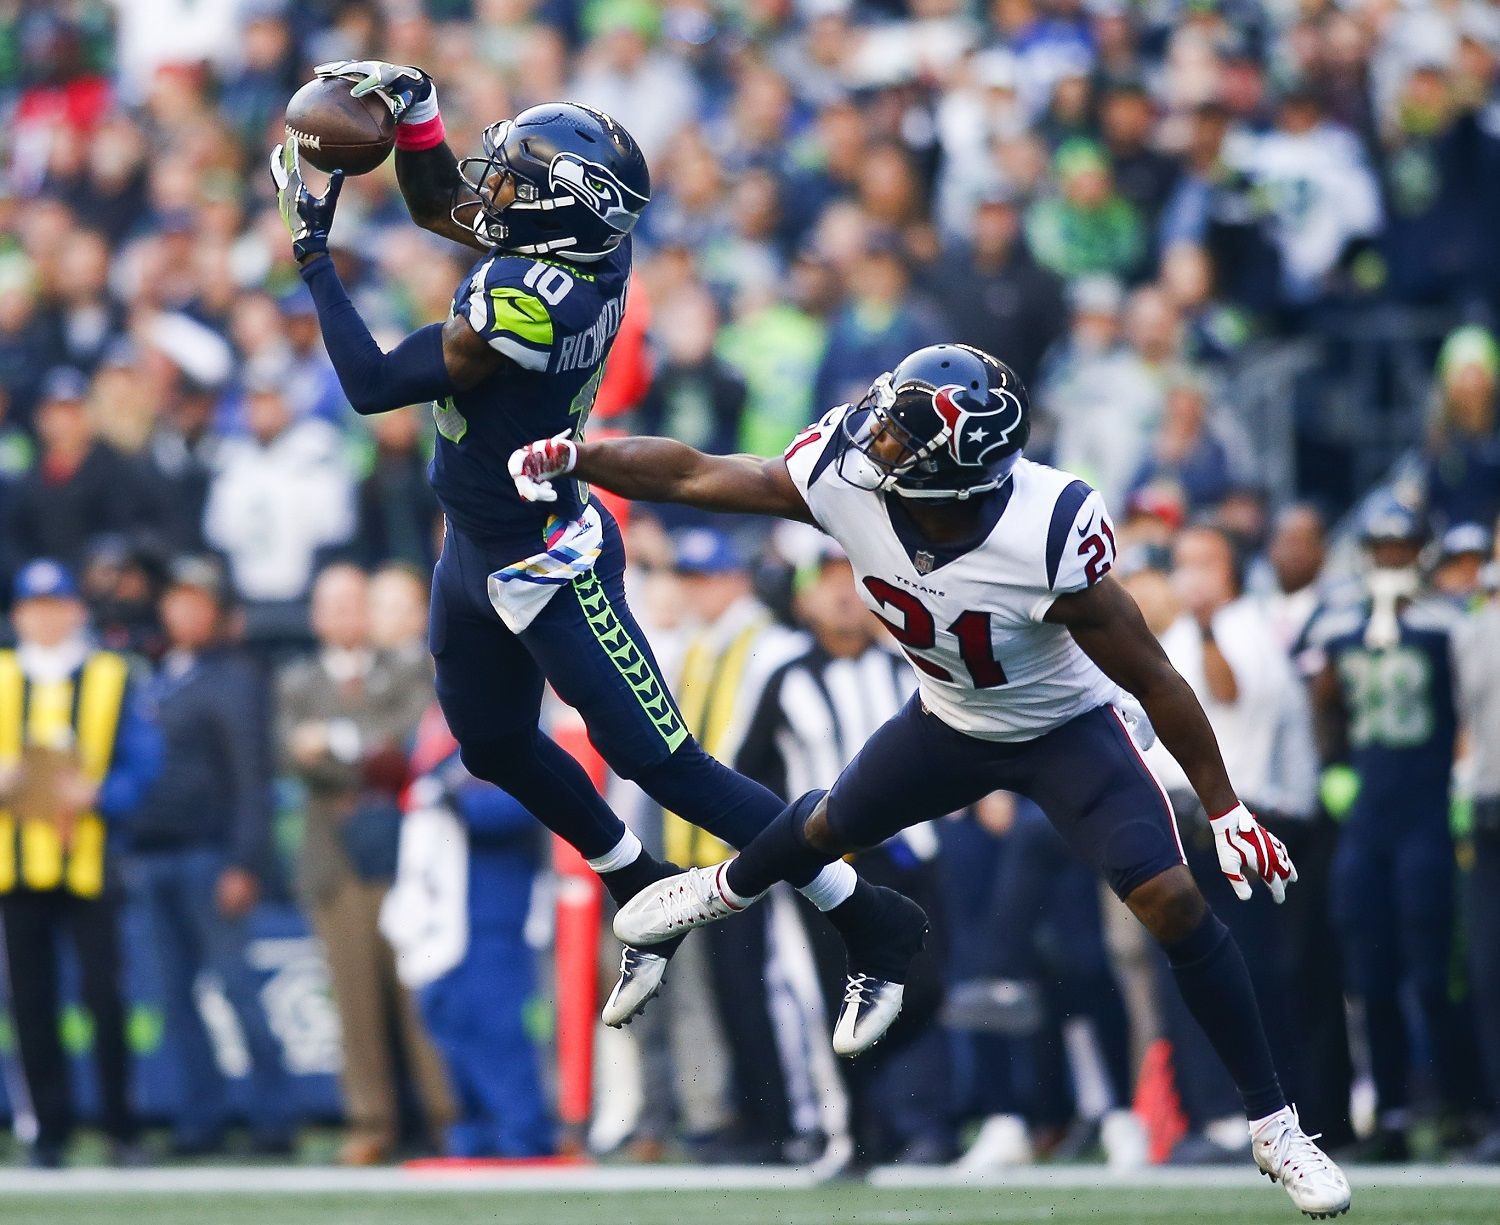 SEATTLE, WA - OCTOBER 29:  Wide receiver Paul Richardson #10 of the Seattle Seahawks makes a 48 yard catch against safety Marcus Gilchrist #21 of the Houston Texans during the fourth quarter of the game at CenturyLink Field on October 29, 2017 in Seattle, Washington. The Seattle Seahawks beat the Houston Texans 41-38. (Photo by Jonathan Ferrey/Getty Images)